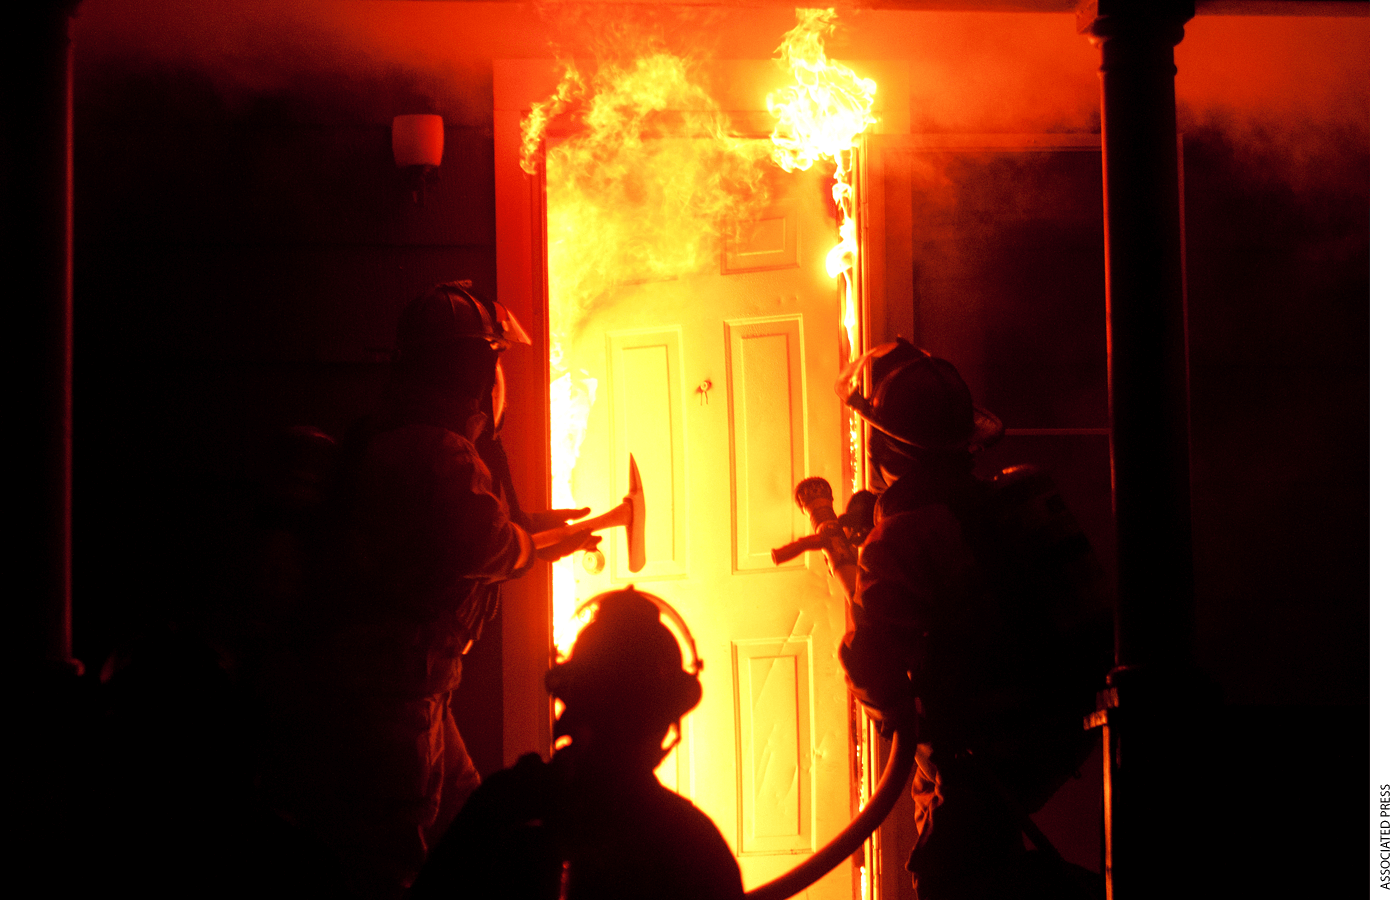 In a Monday, Sept. 17, 2012 photo, Saginaw fire fighters enter a house on the corner of Jackson and Fayette in Saginaw about 11:30 pm.